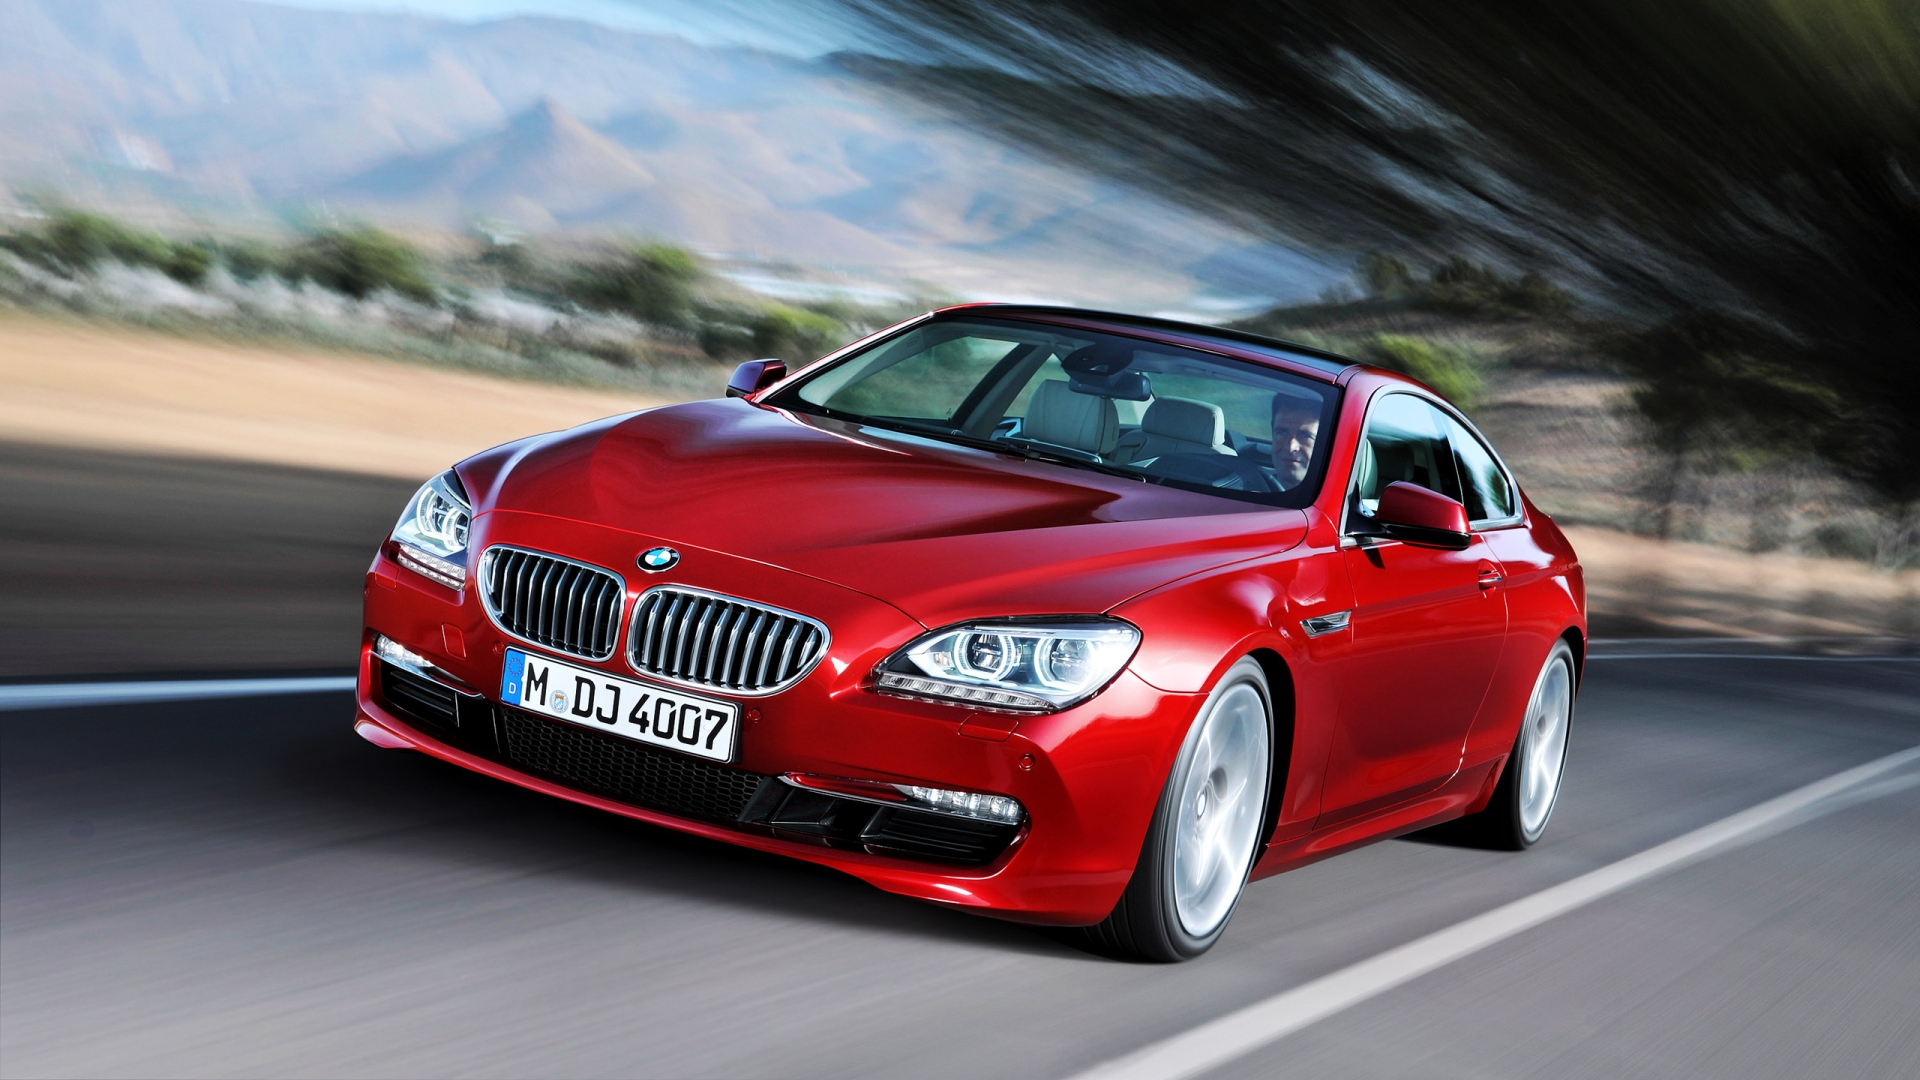 2012 BMW 650i Coupe for 1920 x 1080 HDTV 1080p resolution